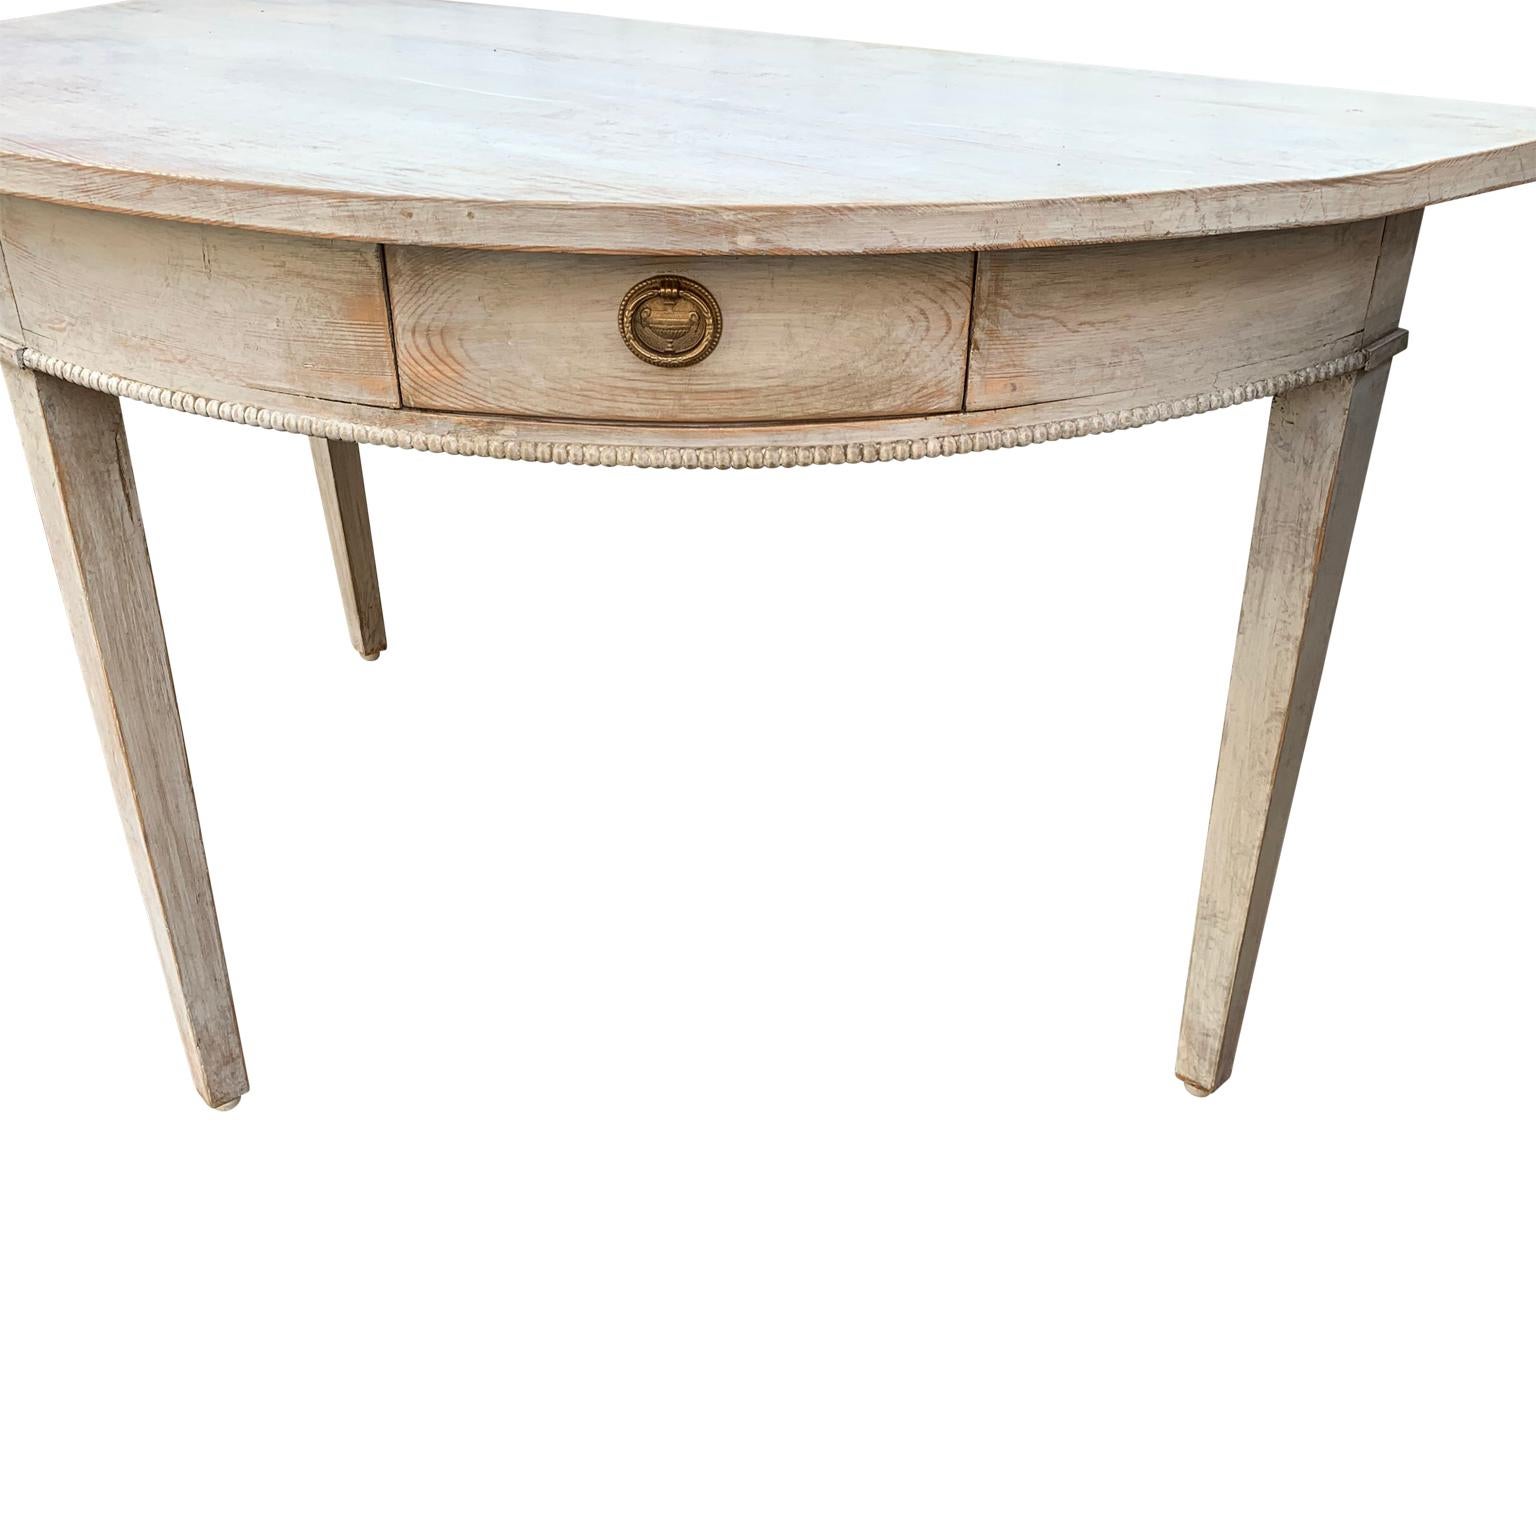 Hand-Painted Pair Of 19th Century Gustavian Demilune Console Tables With Two Drawers